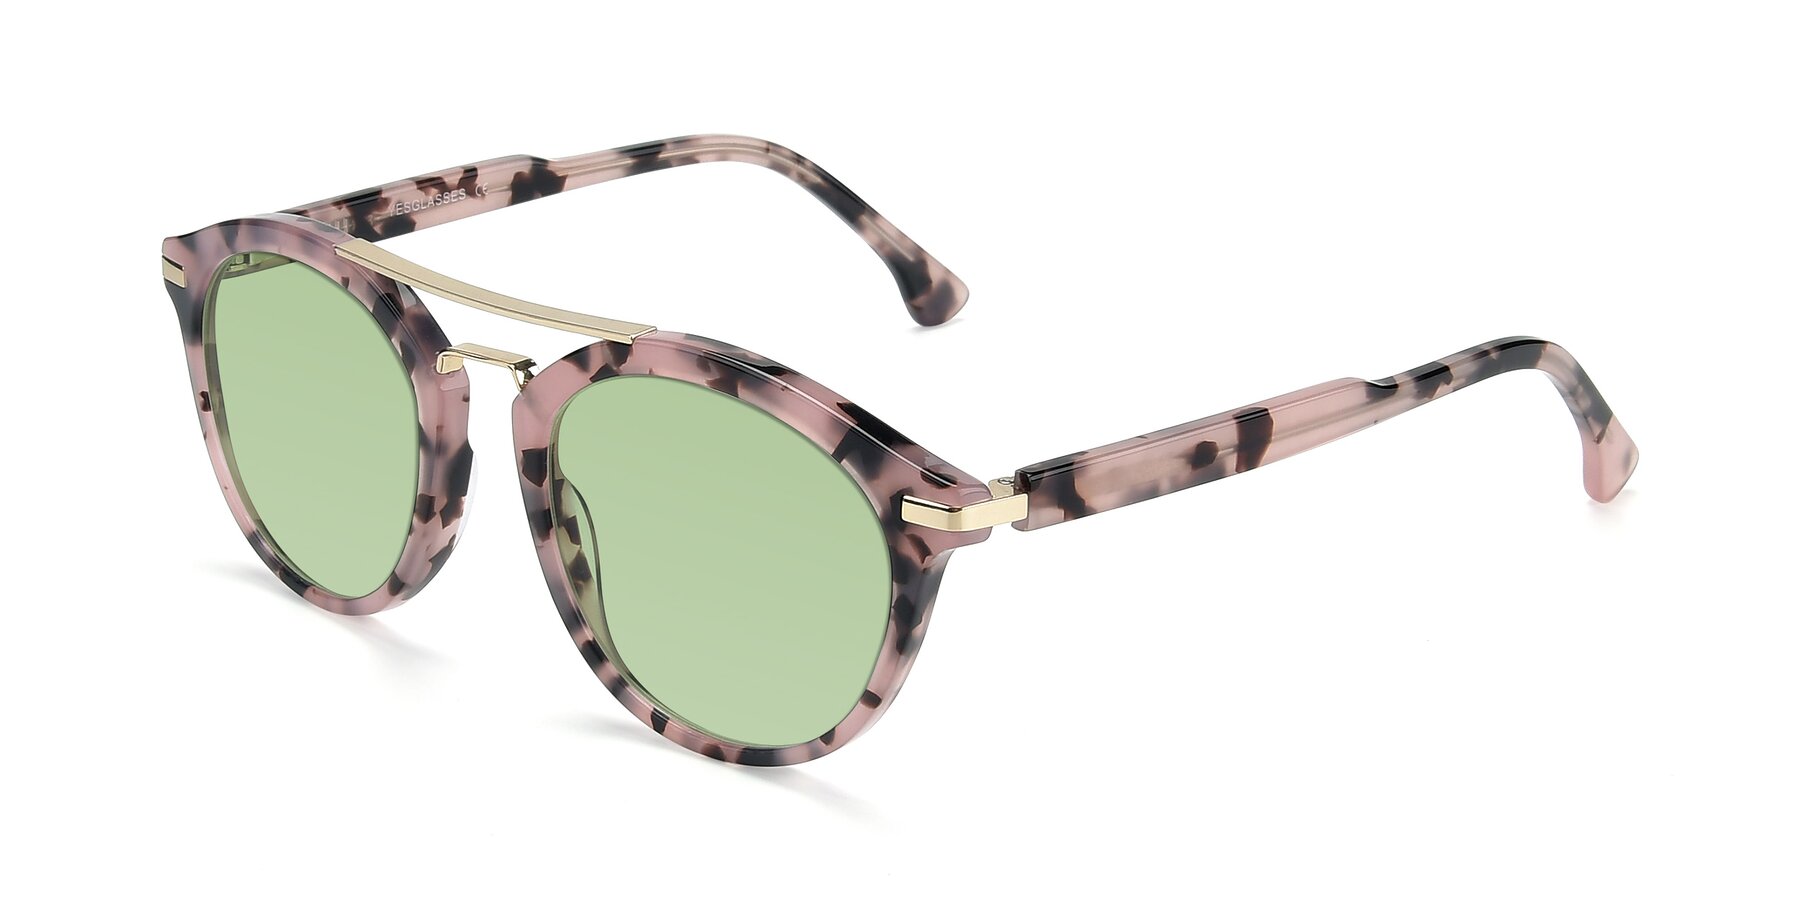 Angle of 17236 in Havana Floral-Gold with Medium Green Tinted Lenses